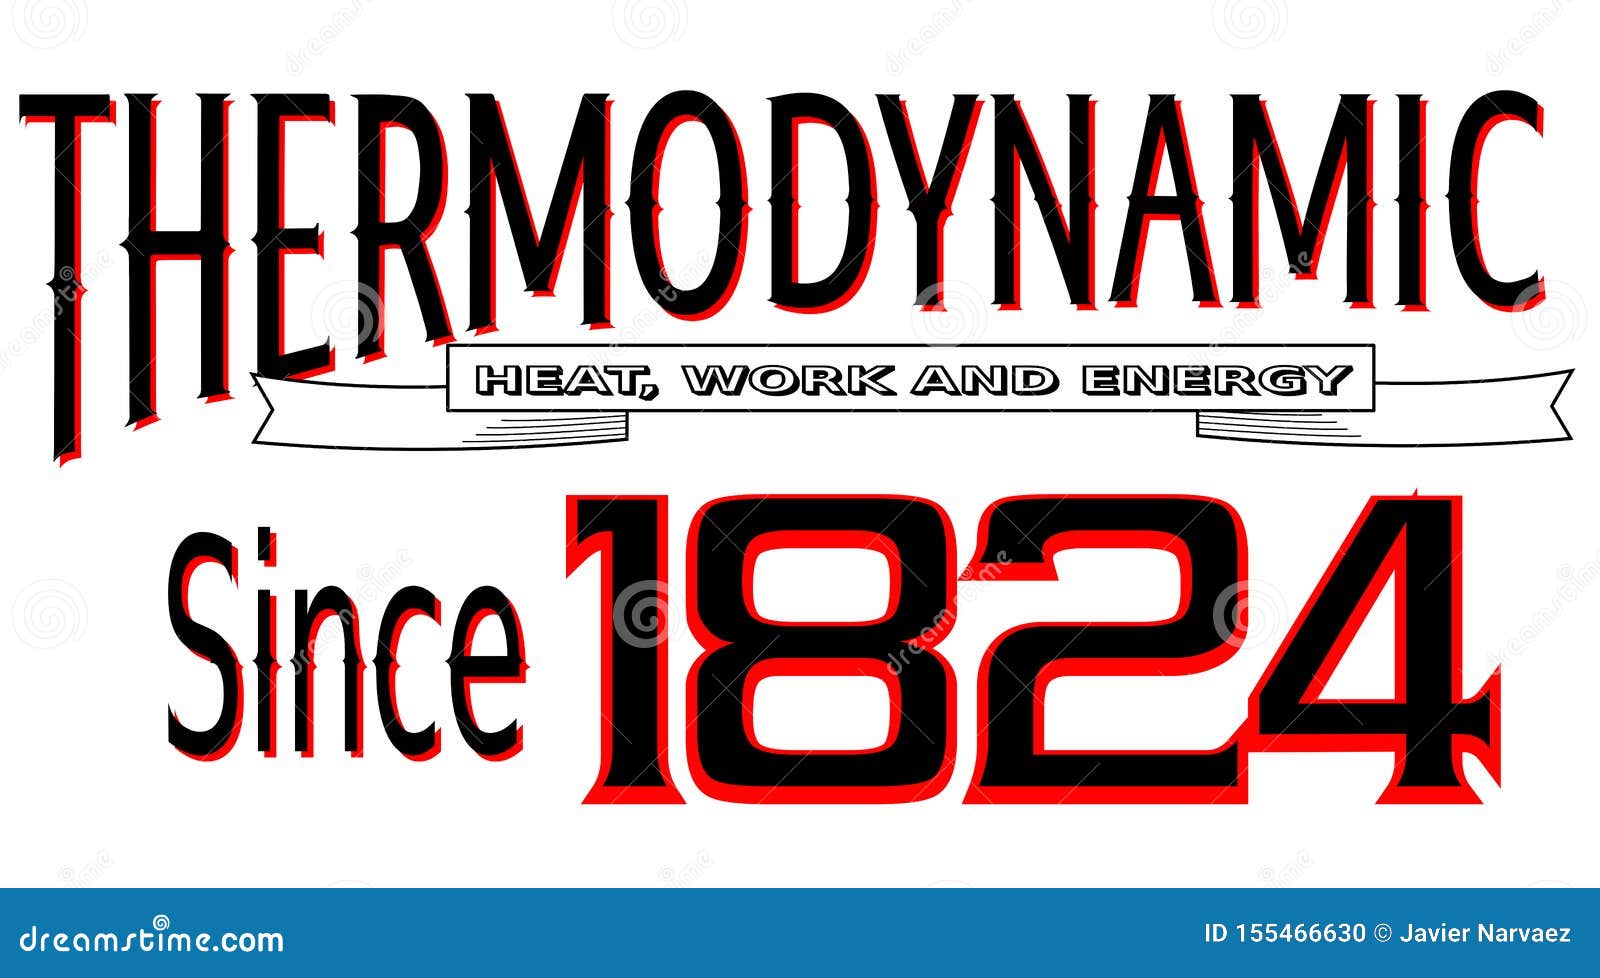 lettering thermodynamic heat, work and energy since 1824